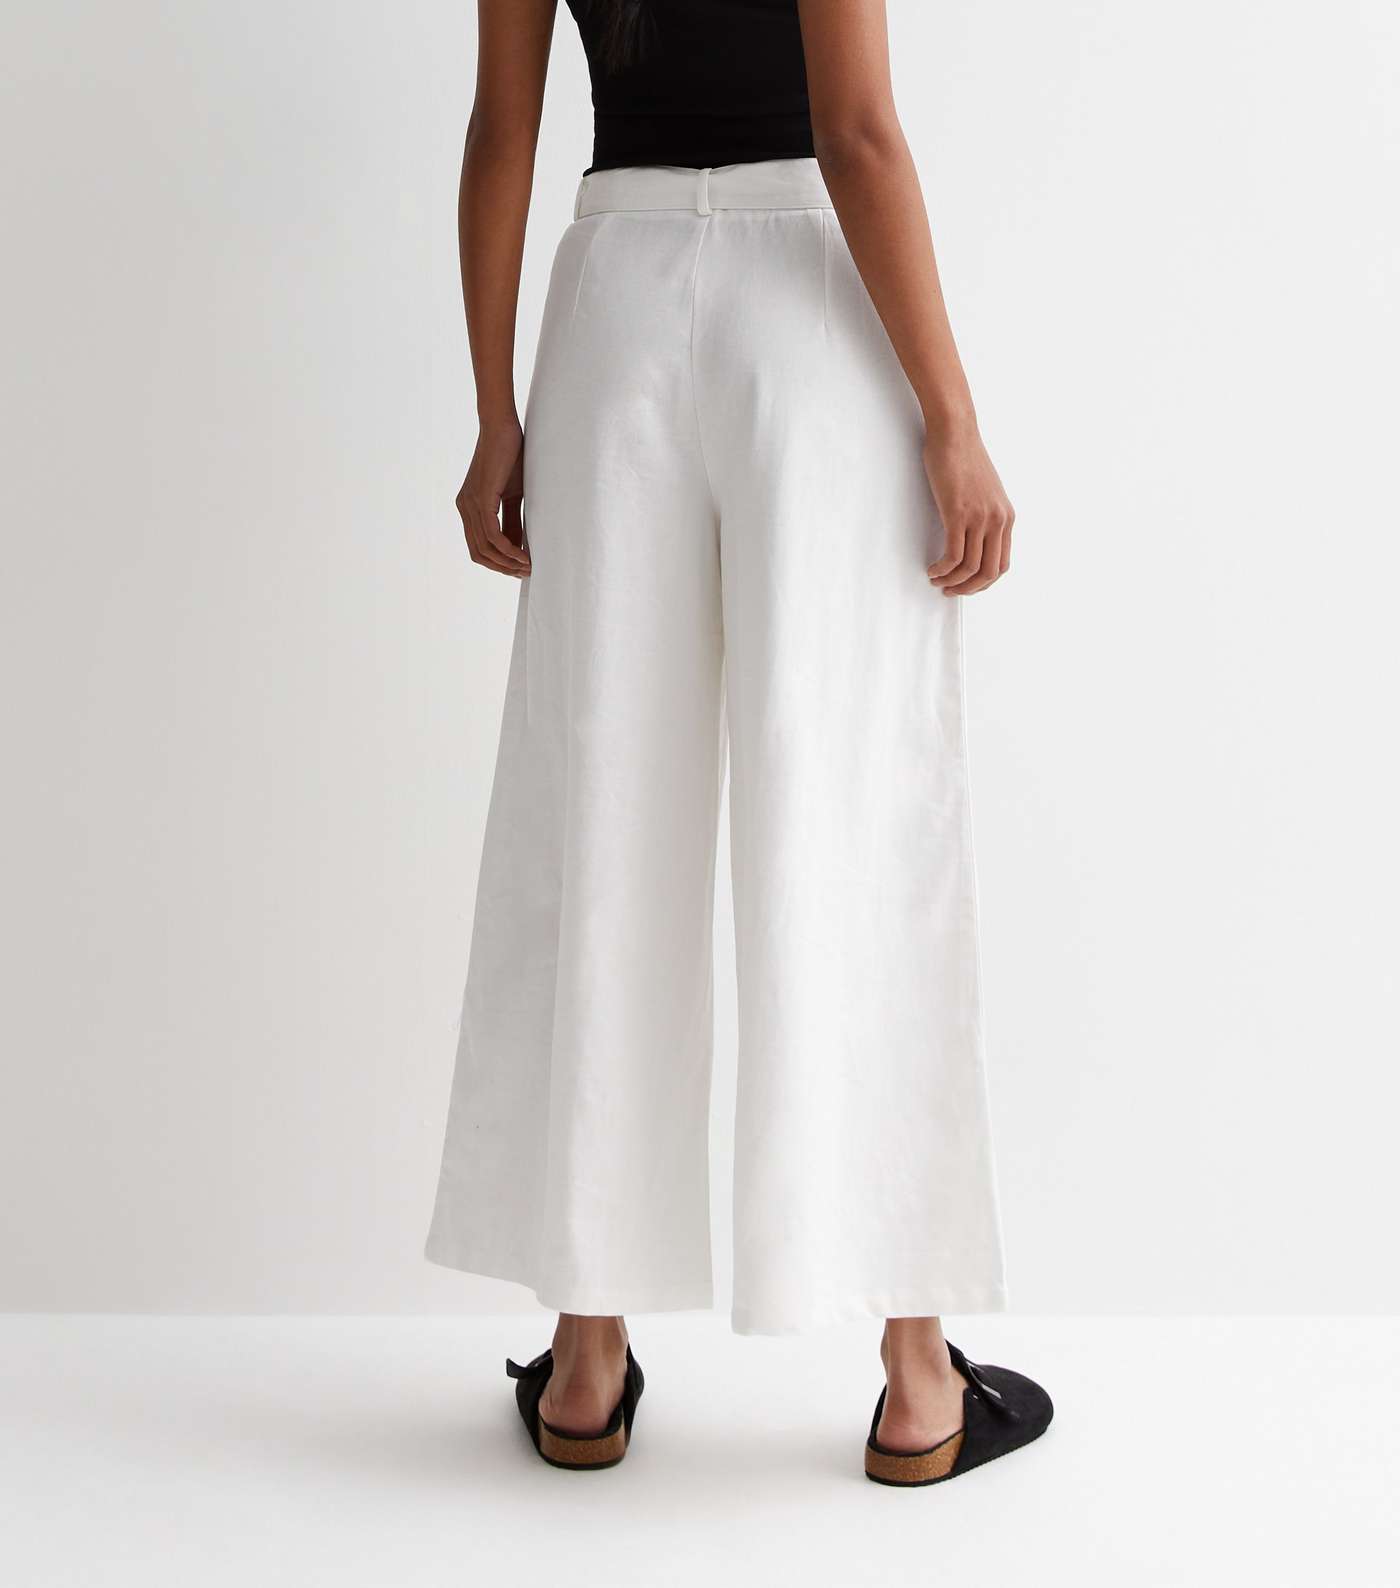 Gini London White Linen-Look Belted Wide Leg Trousers Image 4